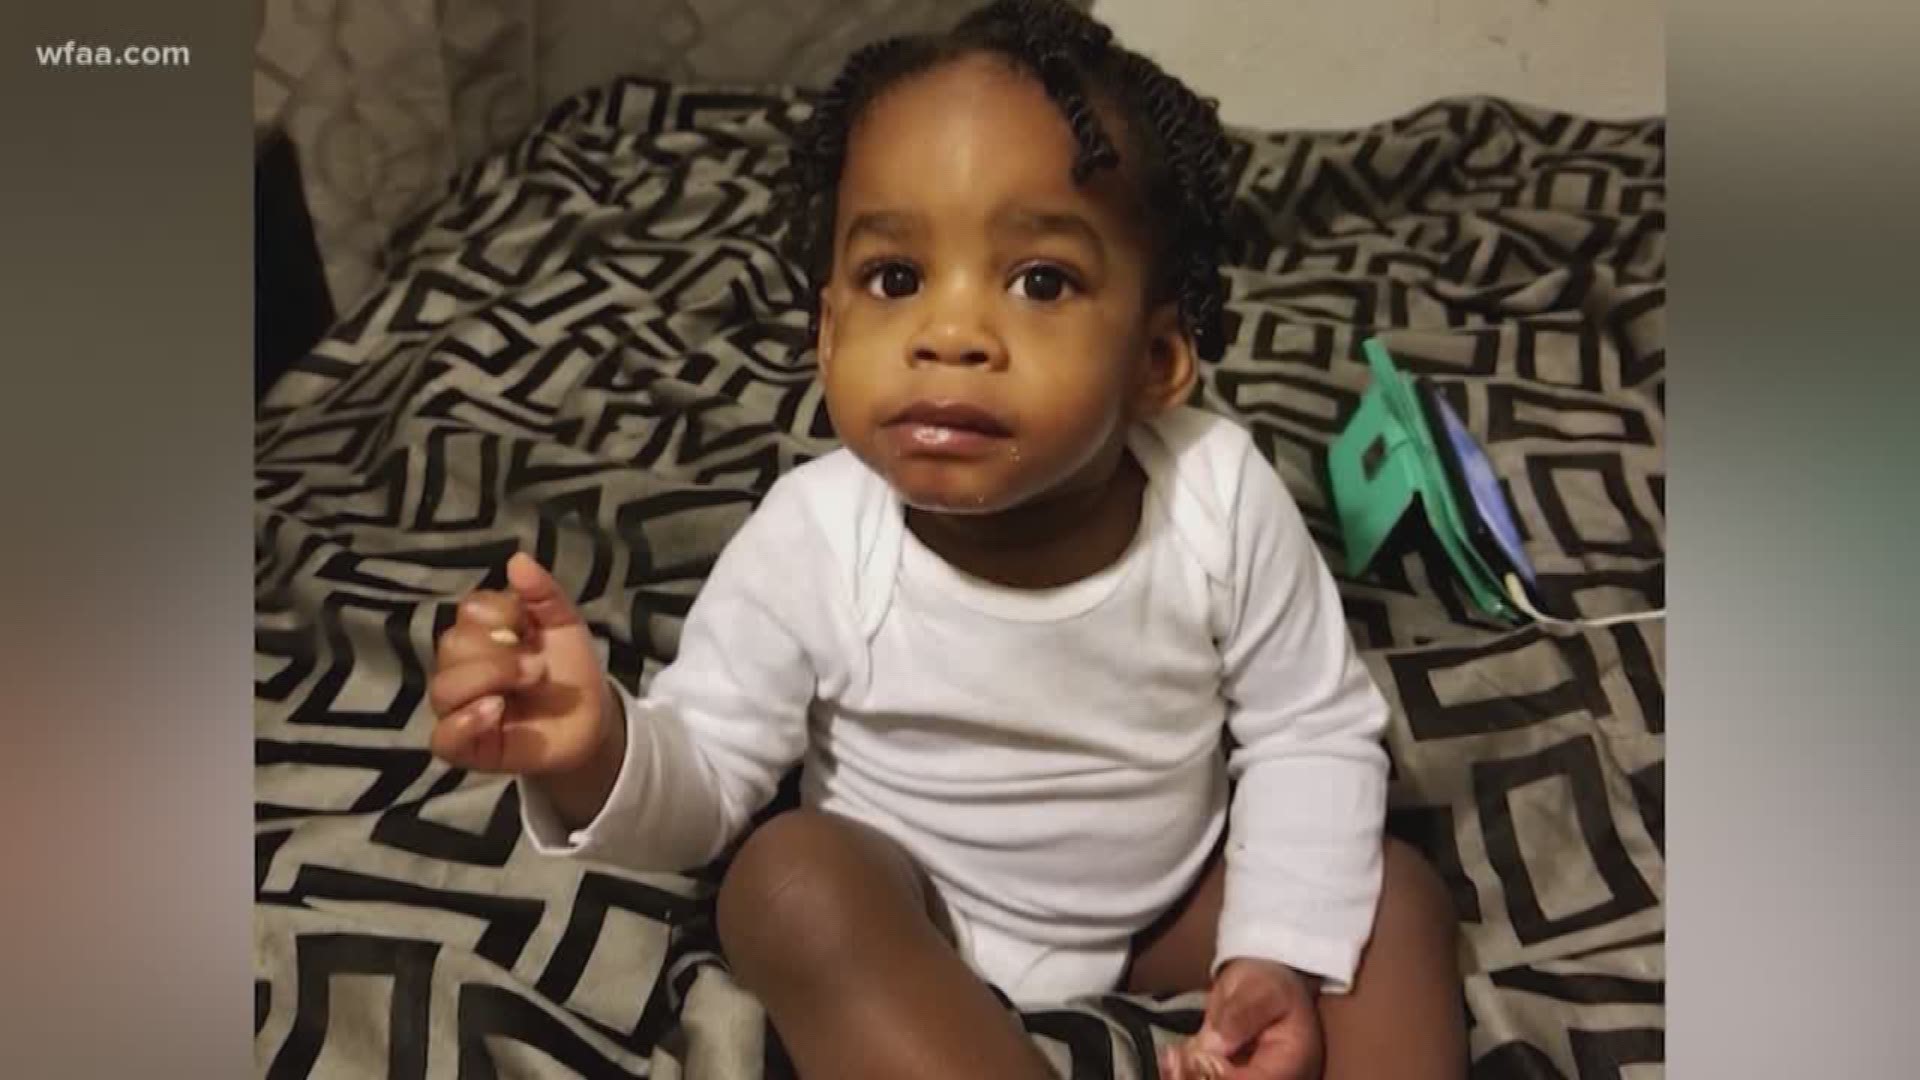 Chrystal Jackson, 27, faces a felony charge in connection with her nephew's death. She claimed the toddler was abducted at night, triggering an Amber Alert.